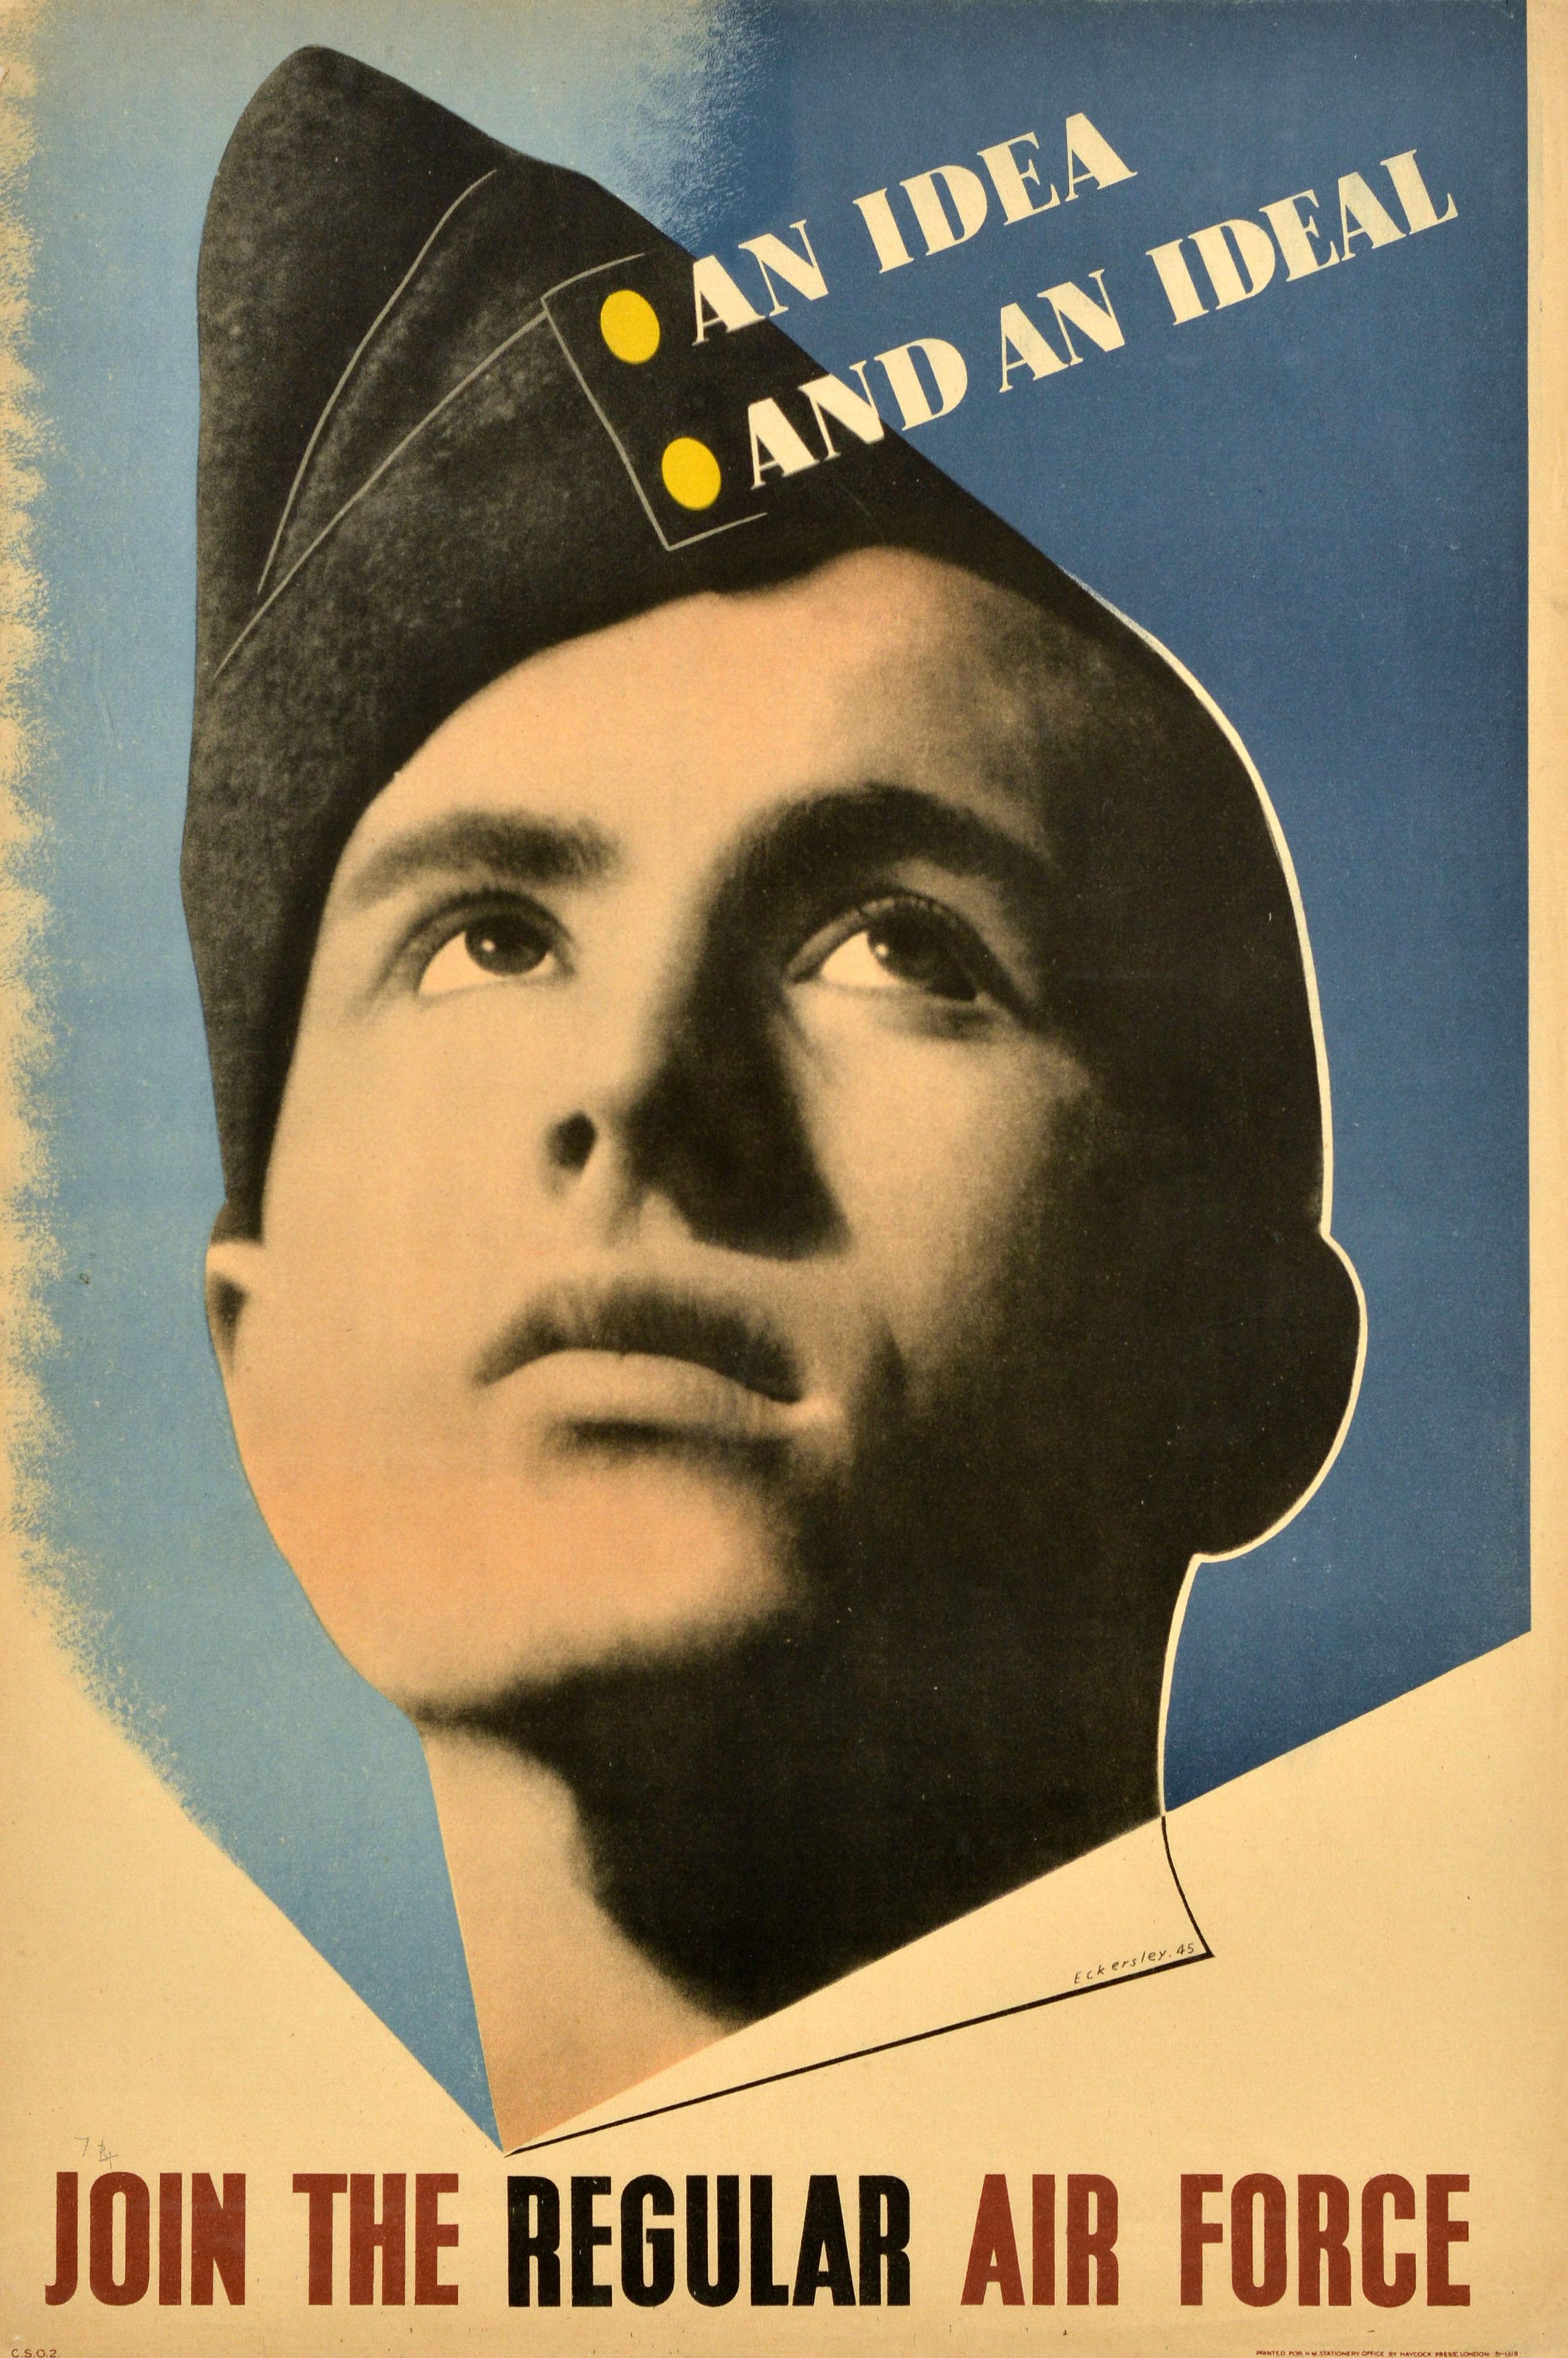 Tom Eckersley Print - Original Vintage WWII Recruitment Propaganda Poster Idea And An Ideal Air Force